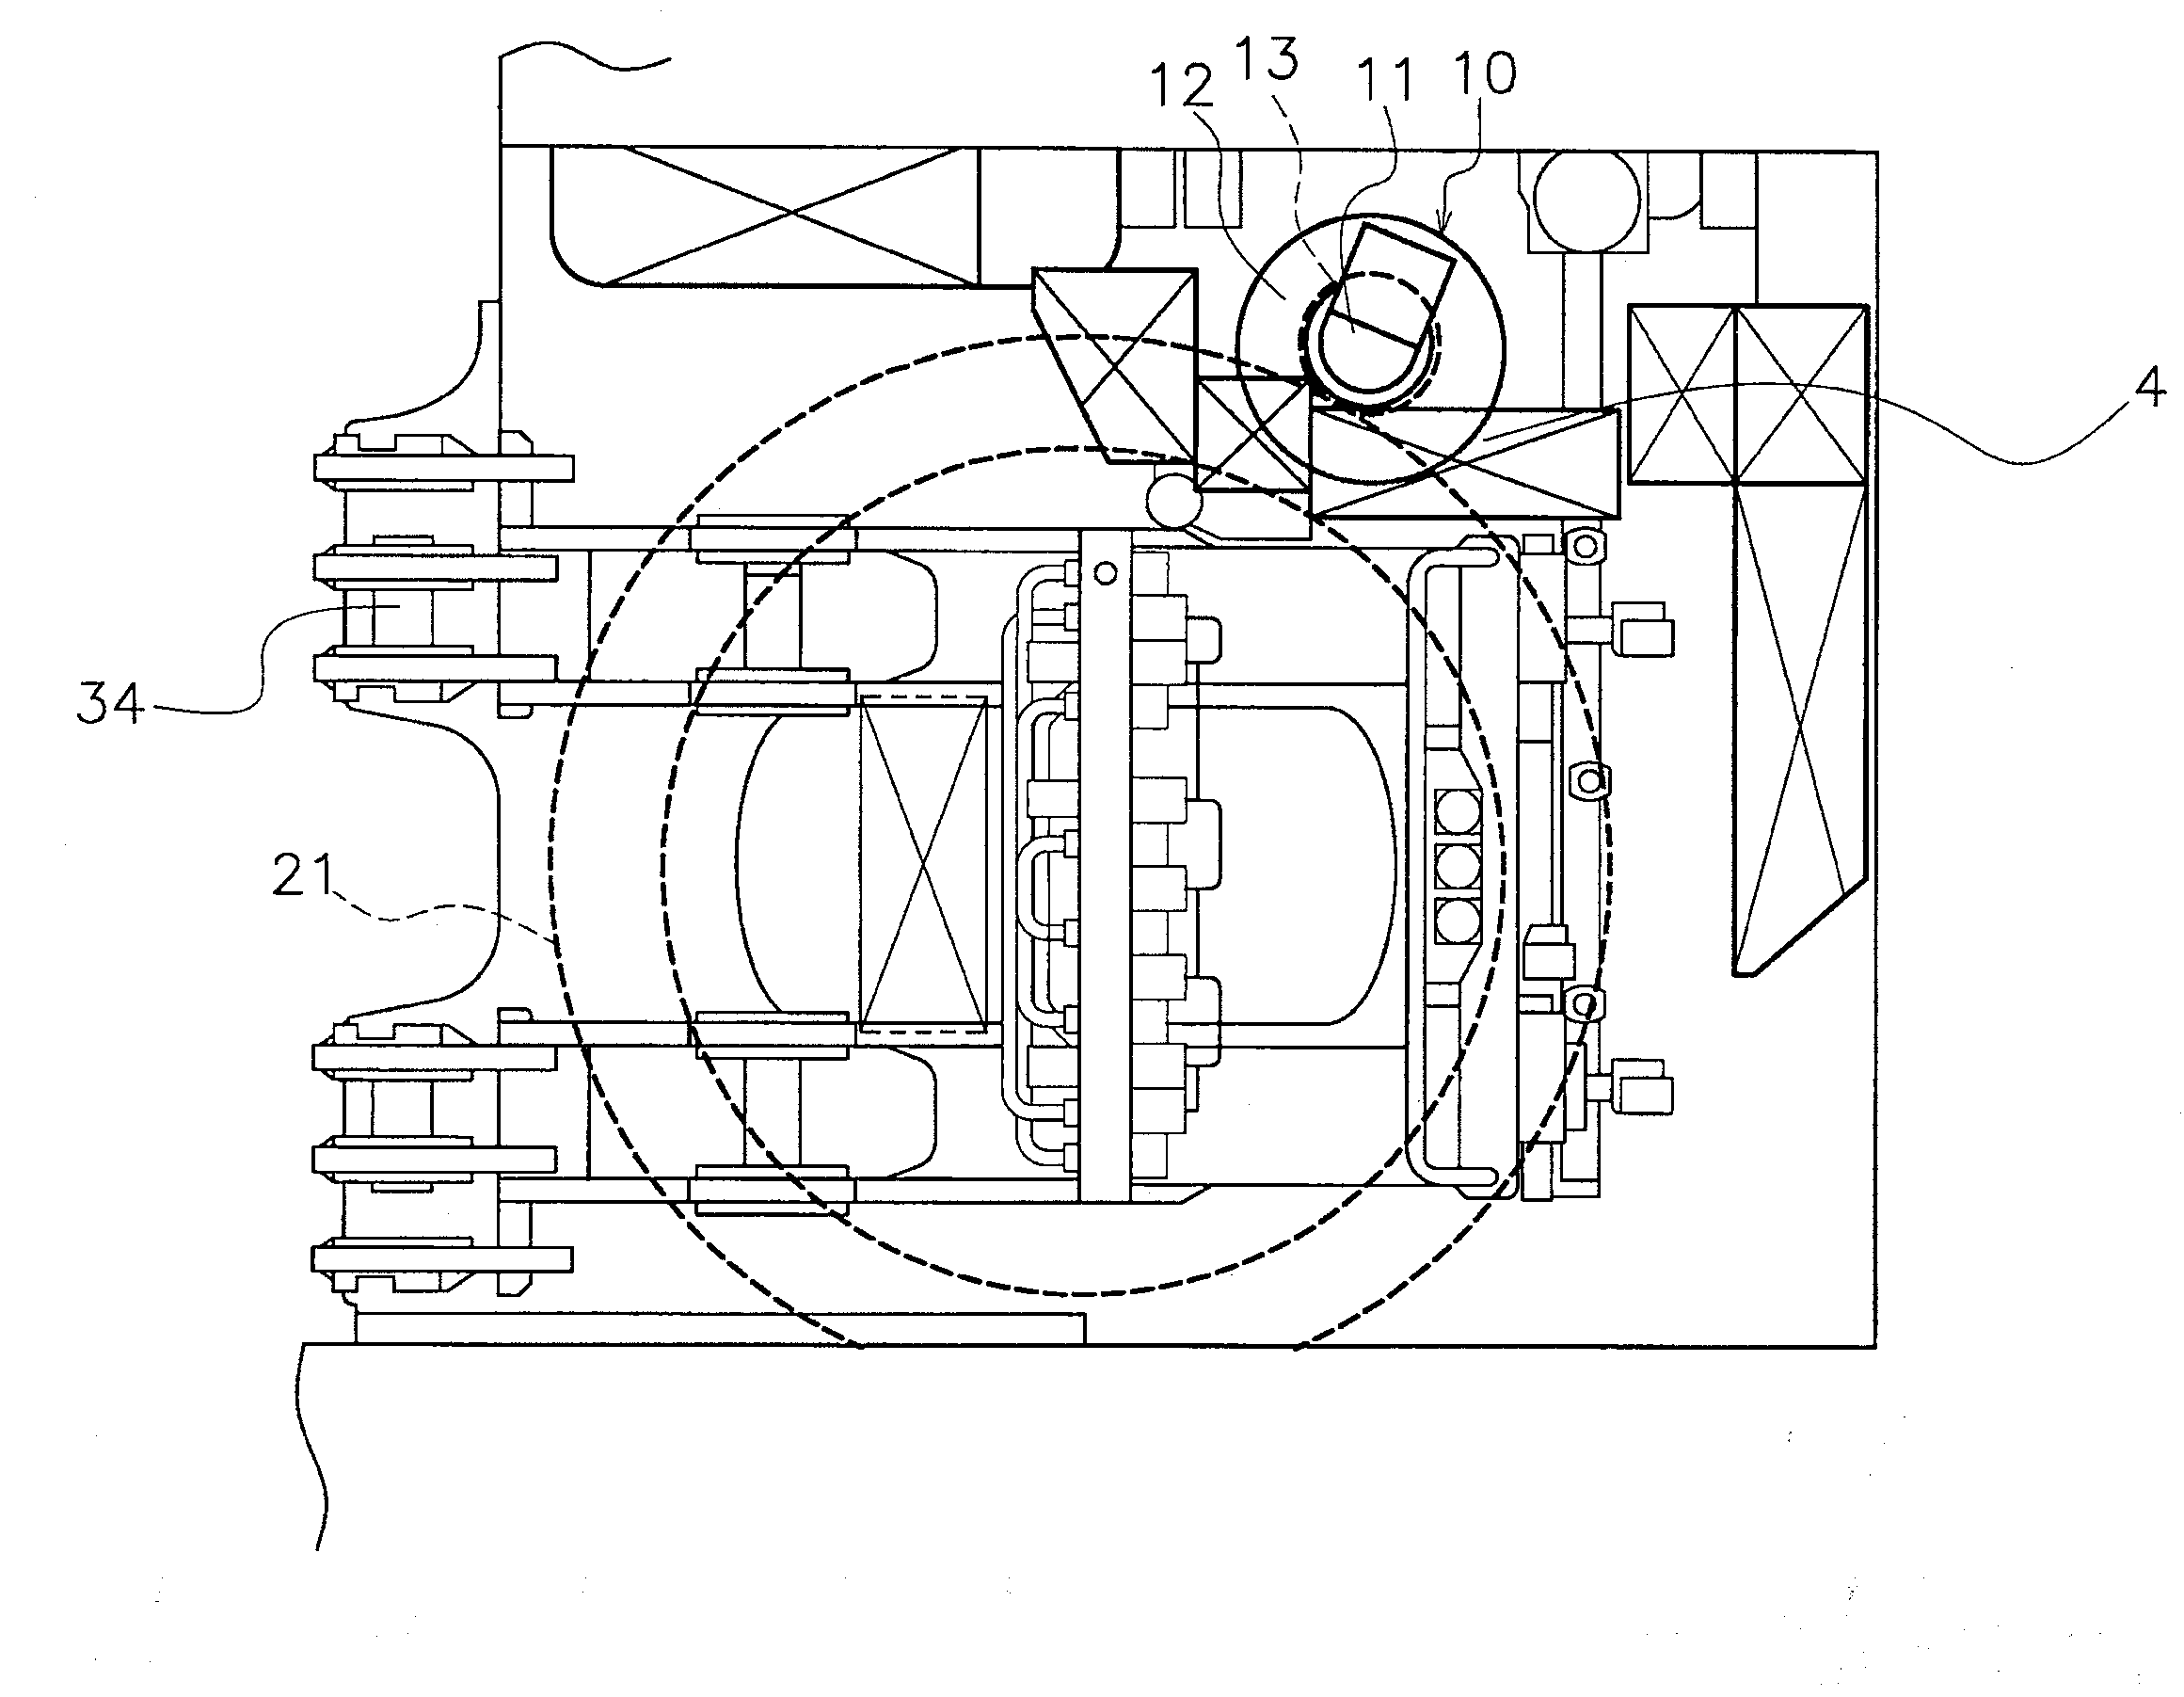 Revolving apparatus for work vehicle